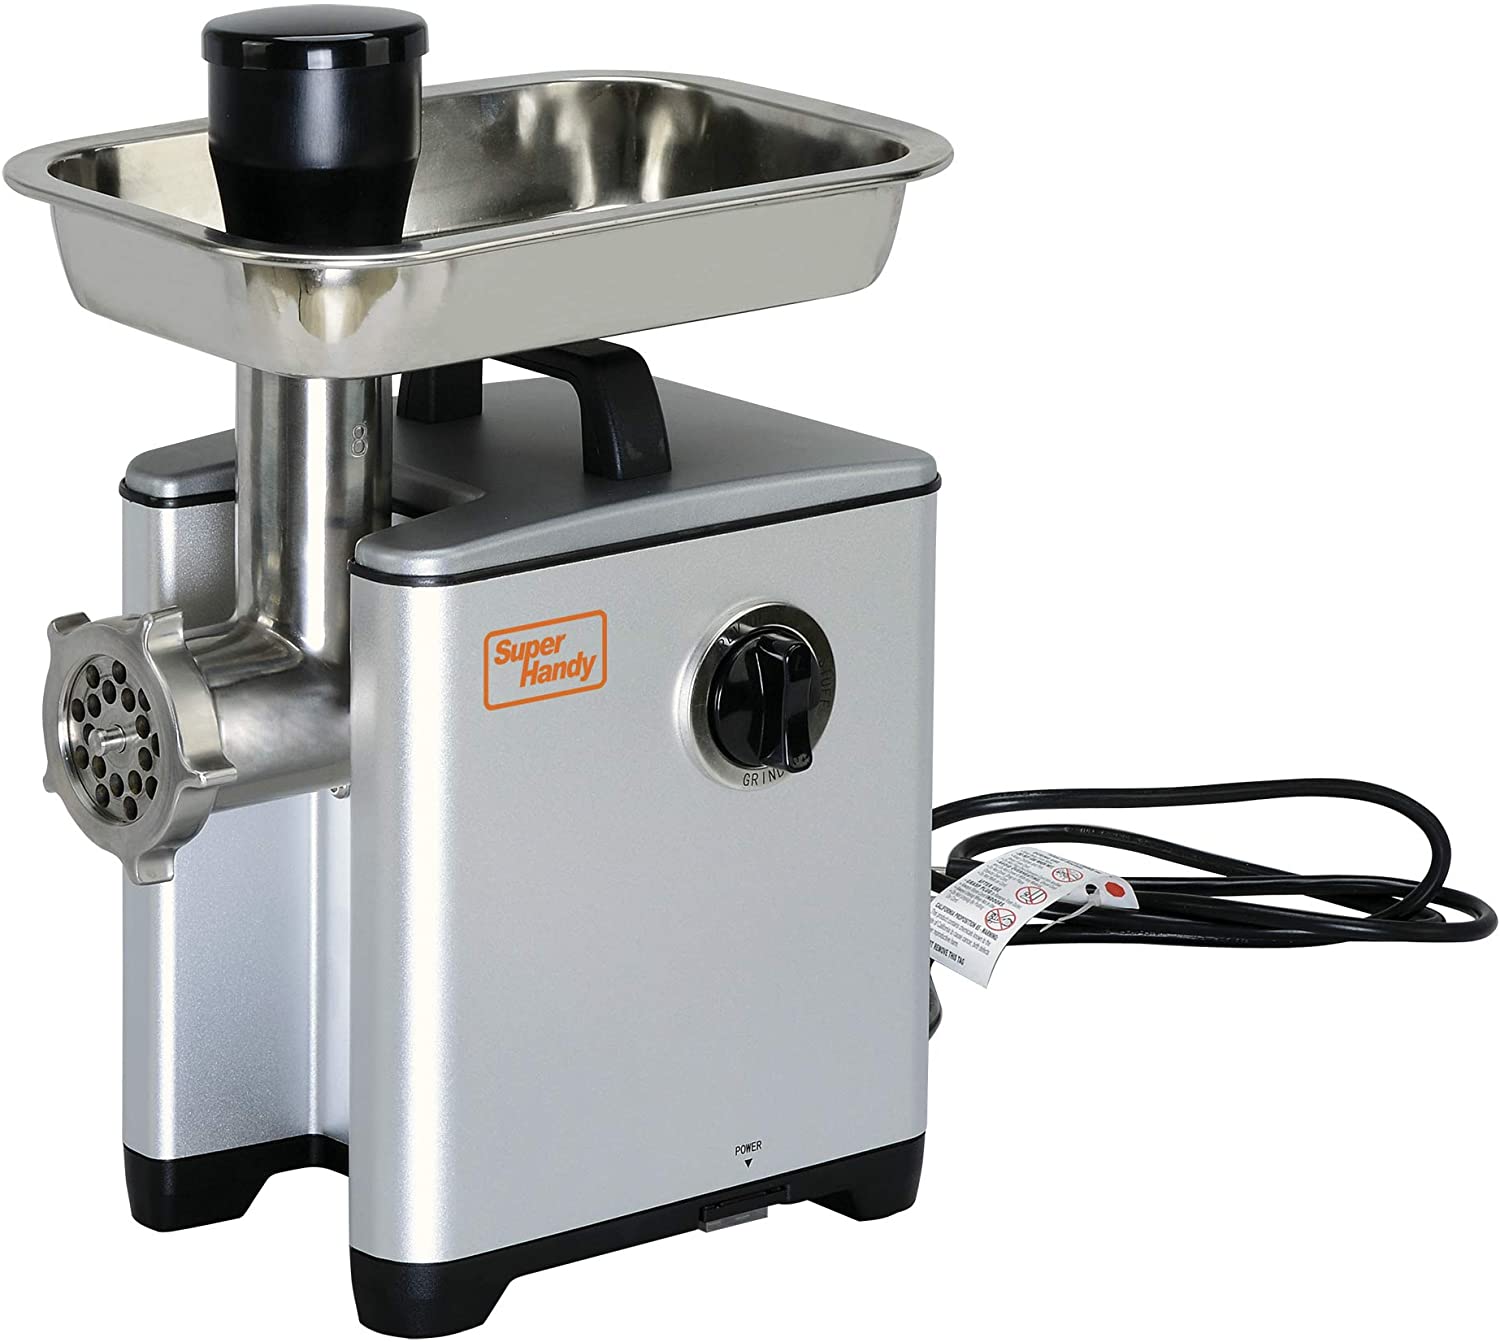 SuperHandy Meat Grinder HEAVY DUTY & EFFICIENT - Our grinder is crafted with long-lasting metal gears, Aluminum Housing stainless steel - Great Circle UK